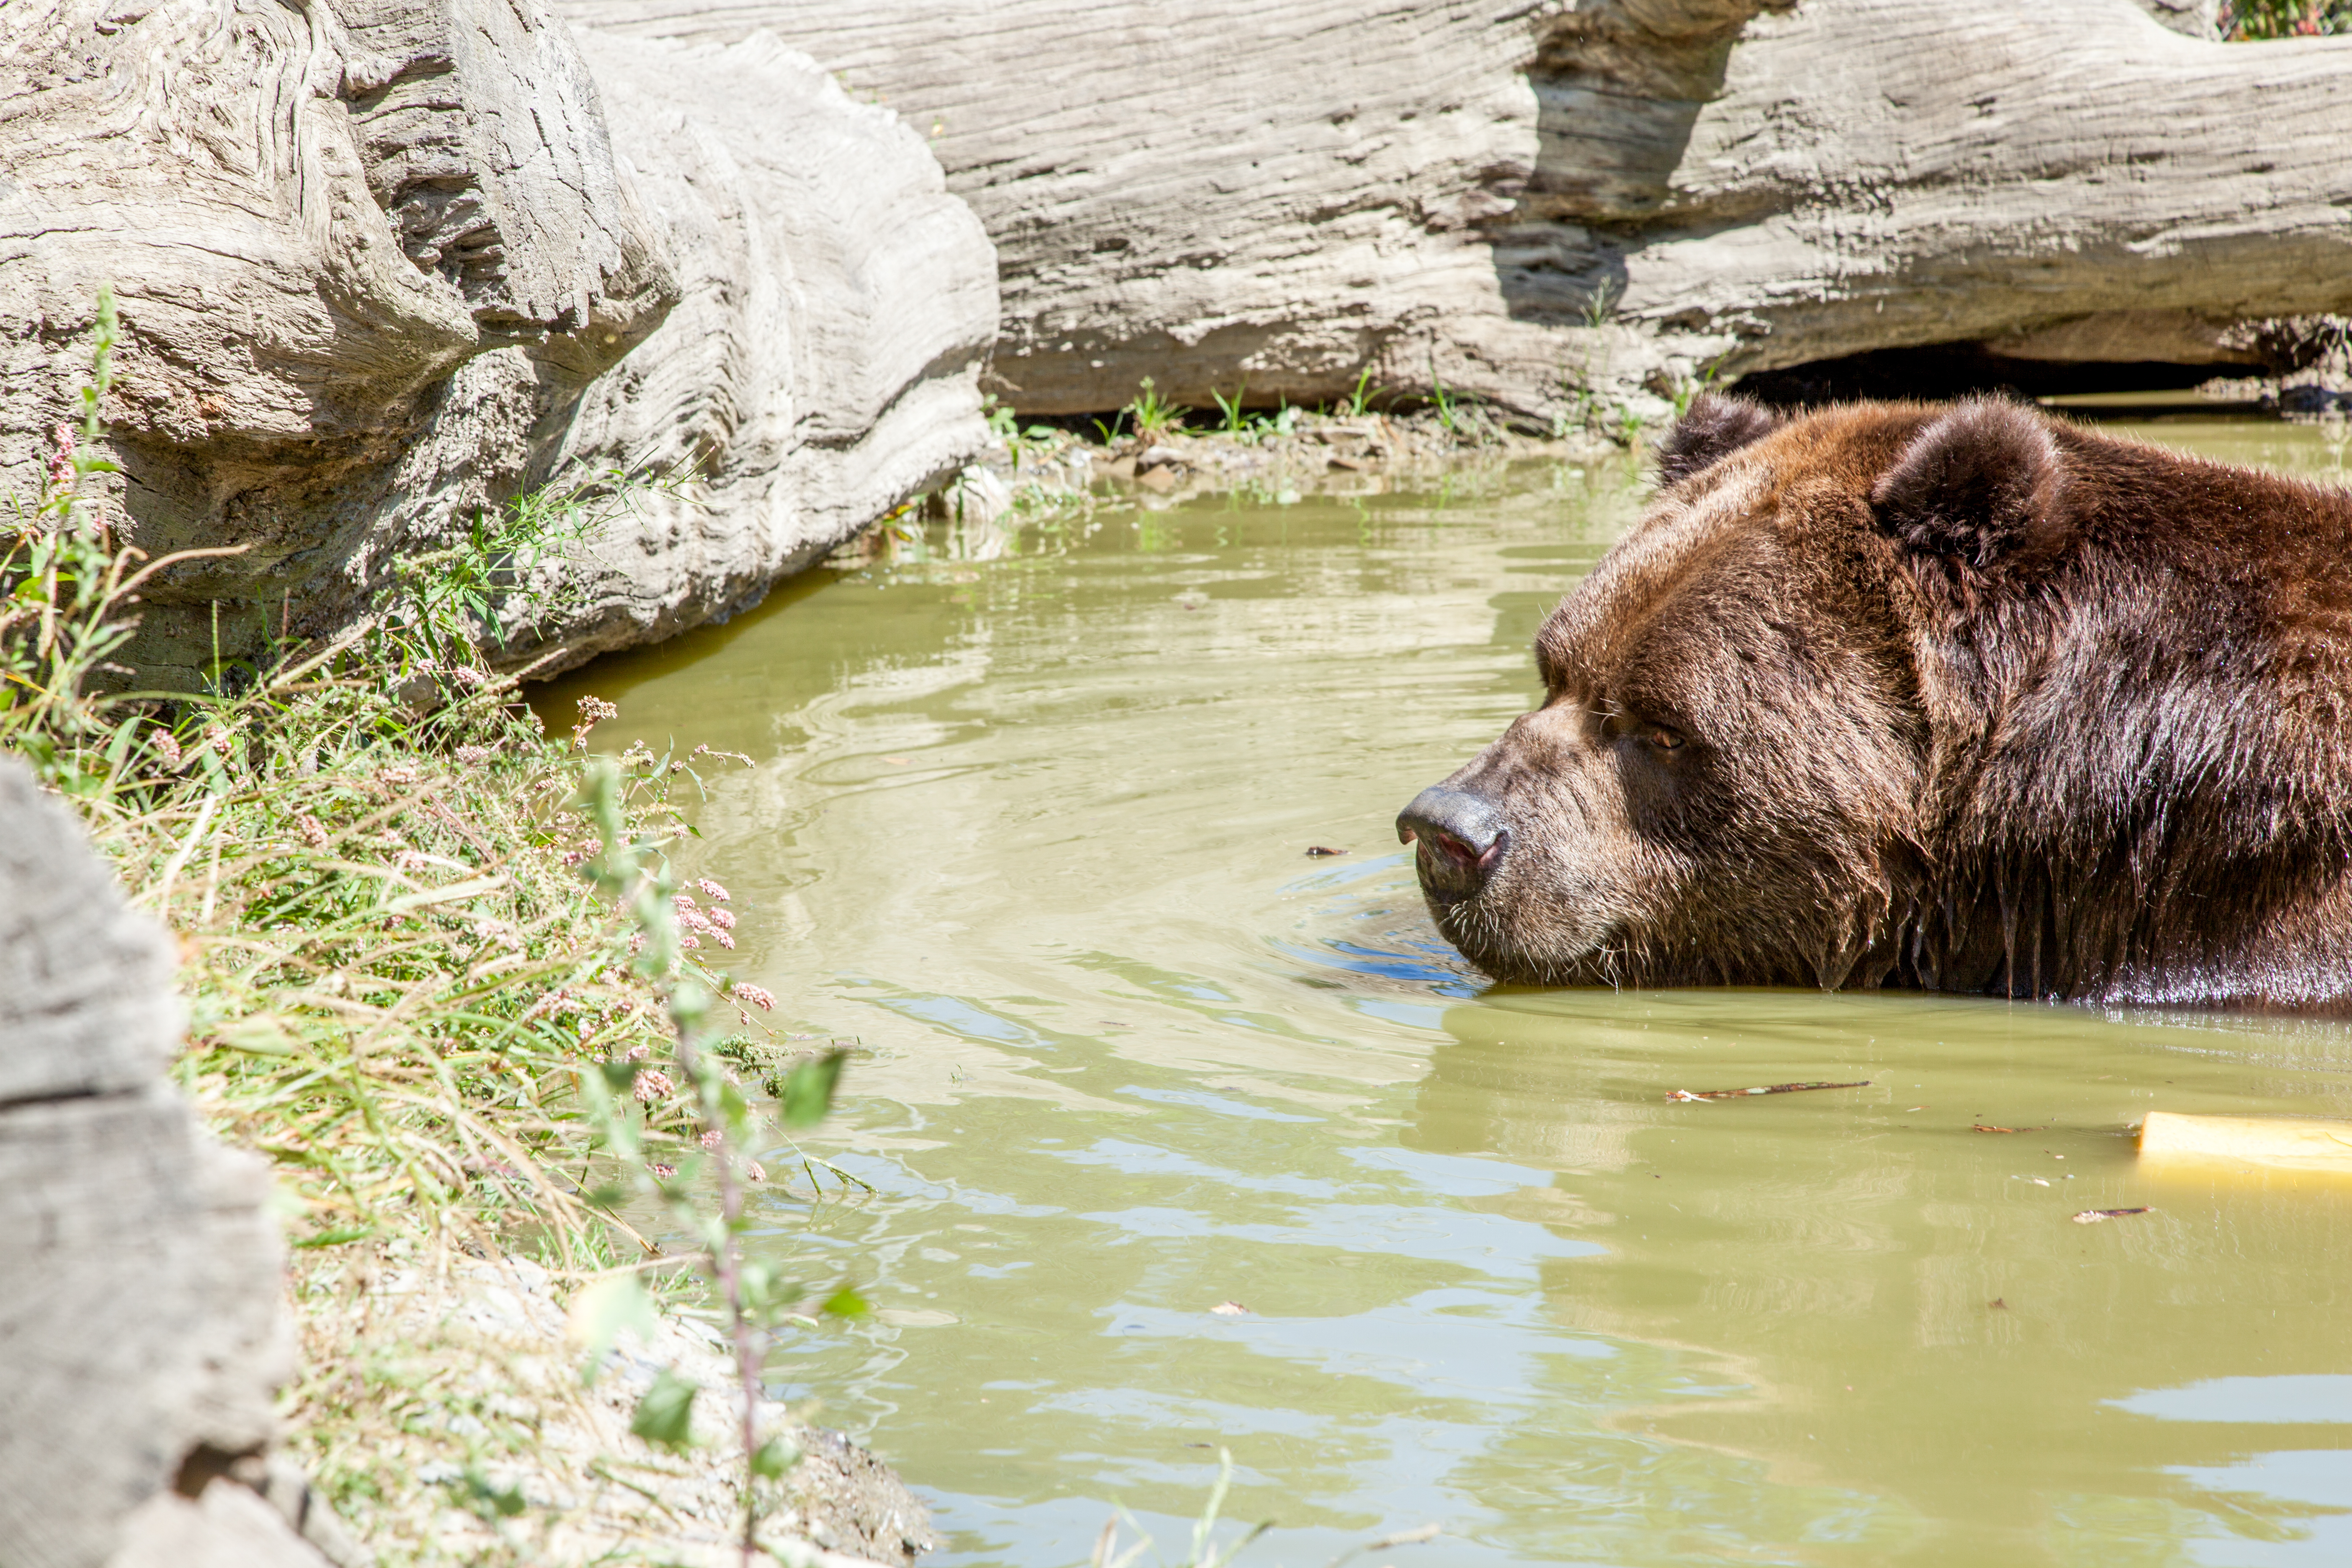 Jimbo, a 22-year-old Kodiak bear Jimbo swimming in the pond in an enclosure at the Orphaned Wildlife Center in Otisville on Sept. 7, 2016. (James Smith)